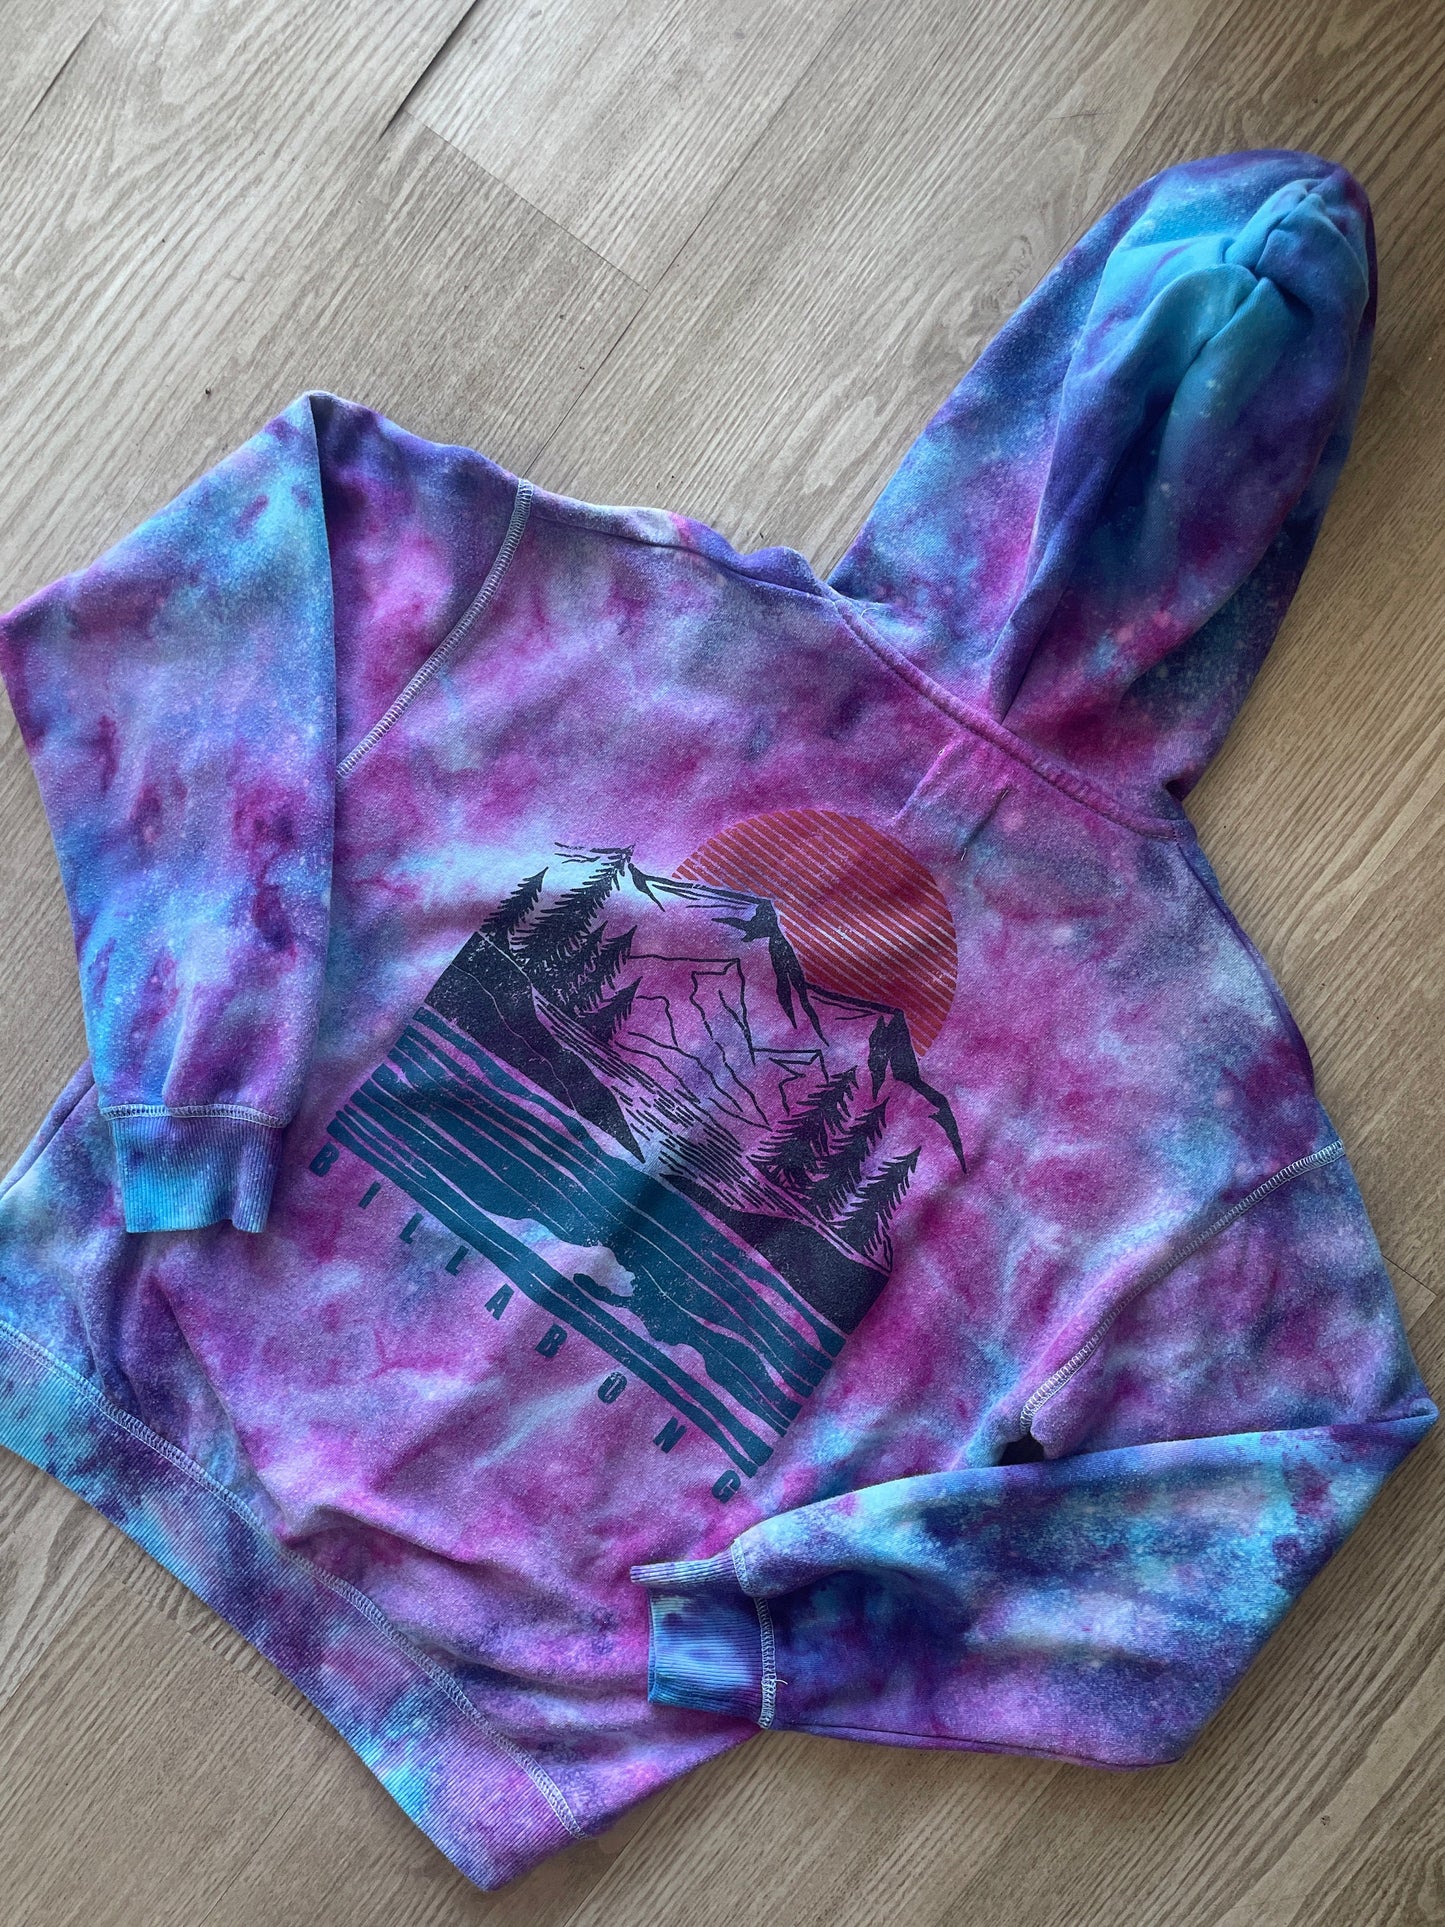 SMALL Men's Billabong Mountainscape Handmade Galaxy Ice Dye Tie Dye Long Sleeve Hoodie | One-Of-a-Kind Upcycled Blue and Purple Sweatshirt